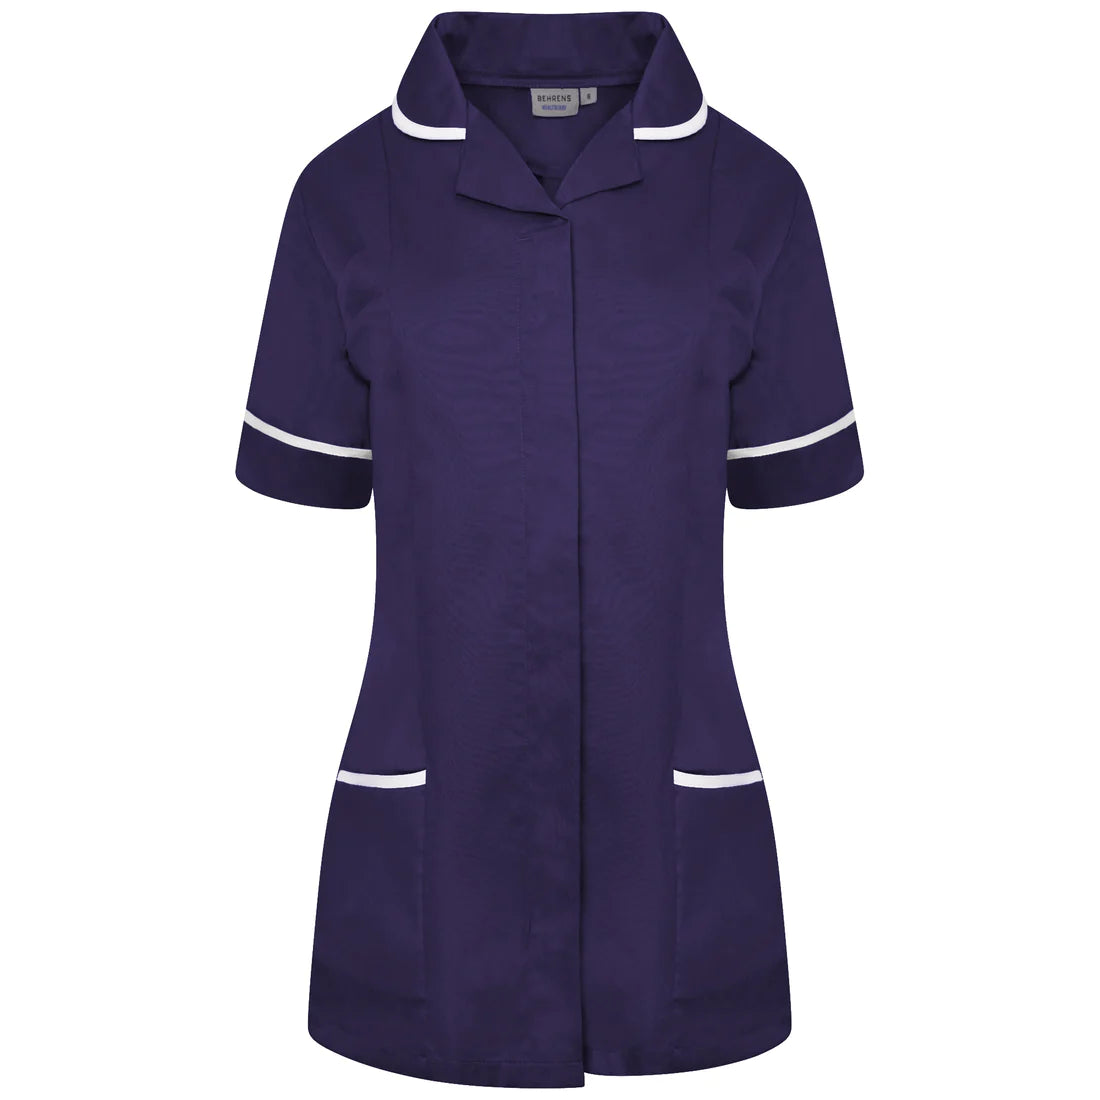 Navy/White Contrast Ladies Tunic with Round Collar - NCLTPS